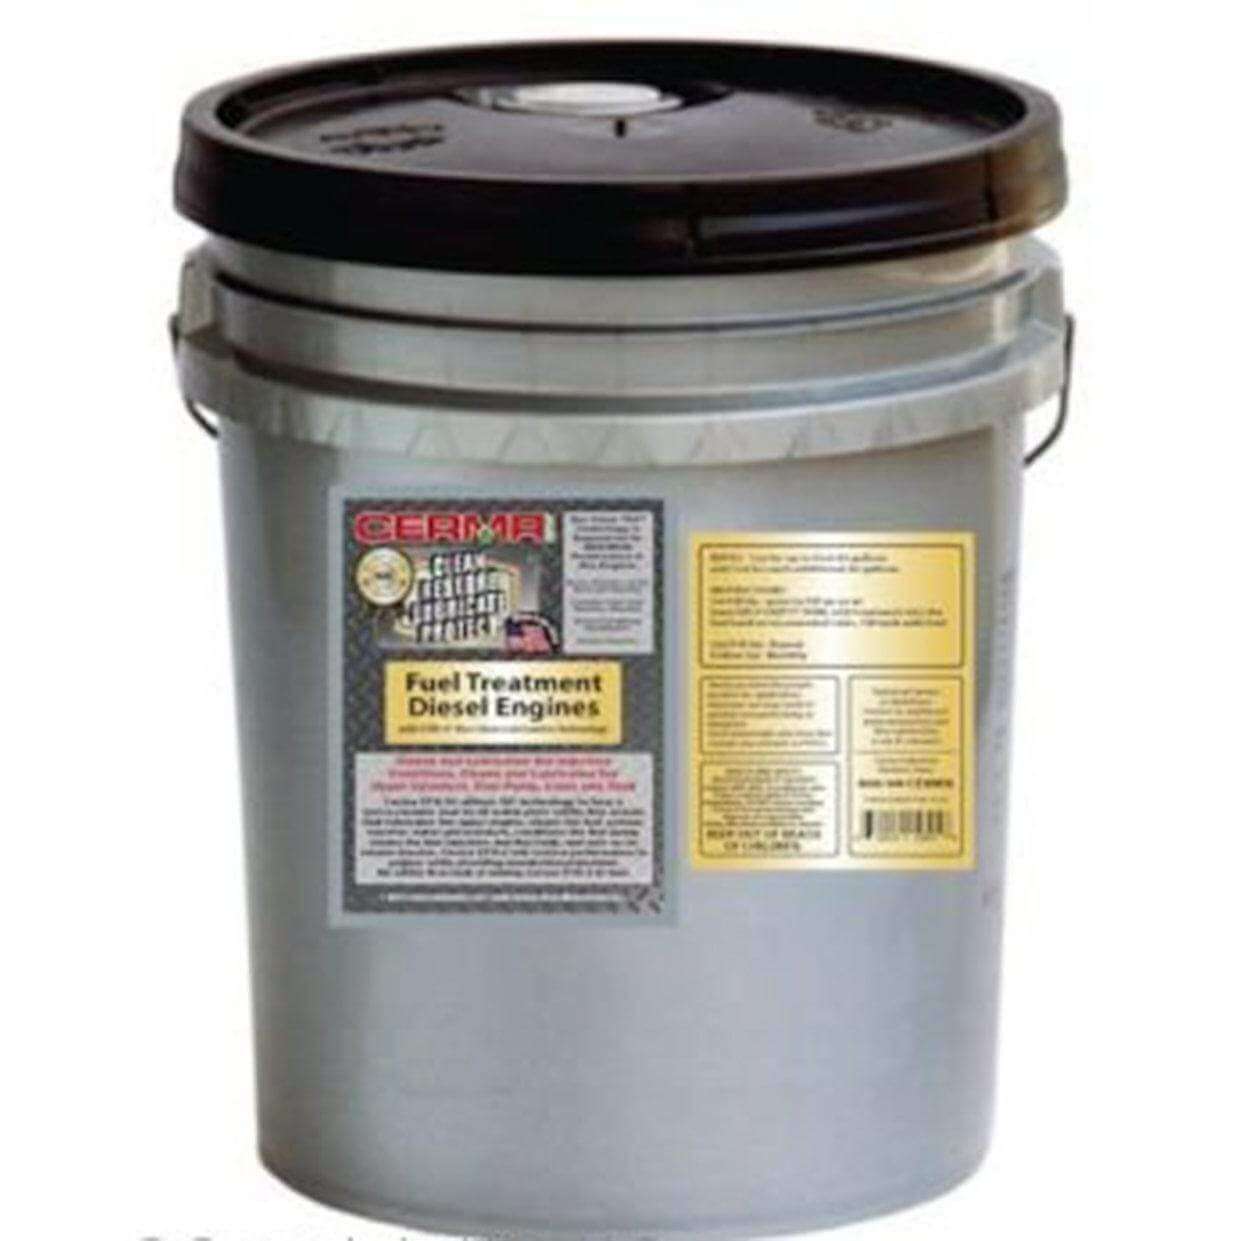 Cerma Ceramic Fuel Treatment for Diesel Engines at $924.42 only from cermatreatment.com